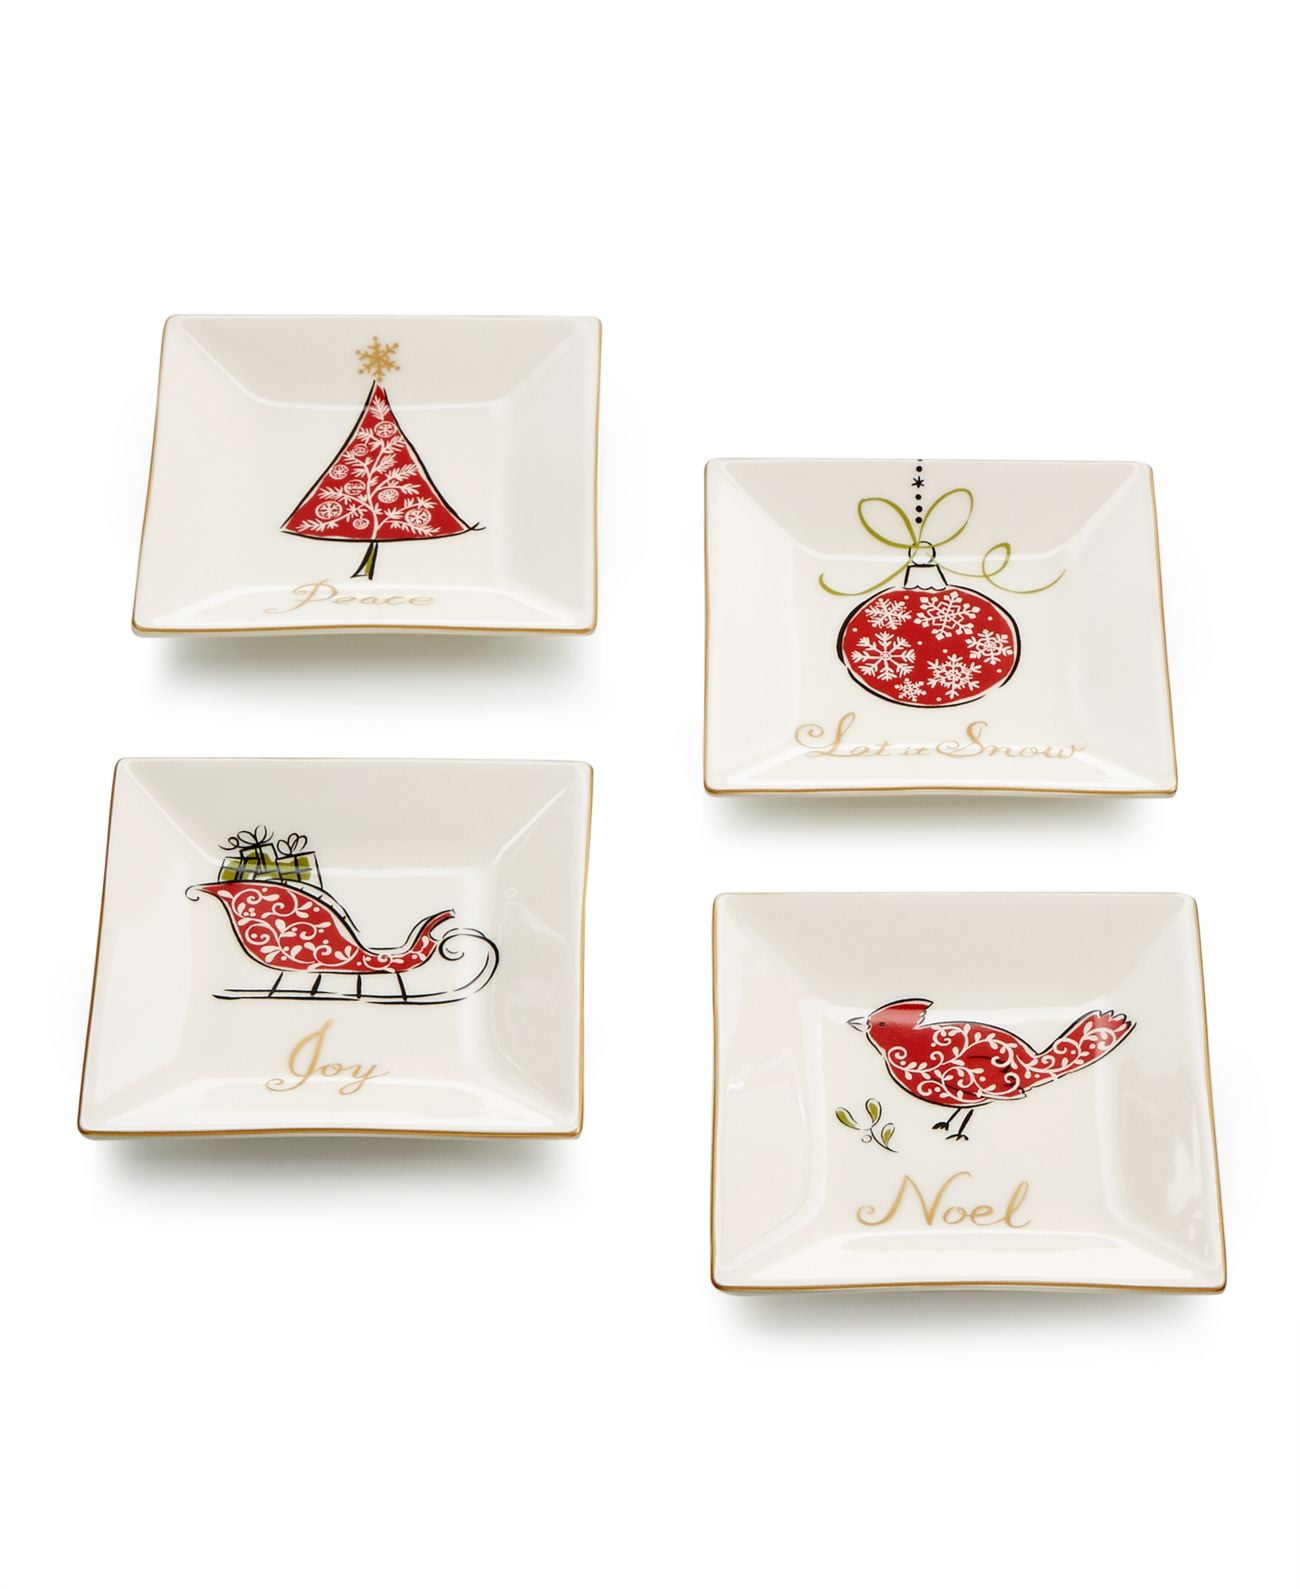 S/4 222 FIFTH CHRISTMAS TUNES HOLIDAY APPETIZER PLATES s RED/WHITE 